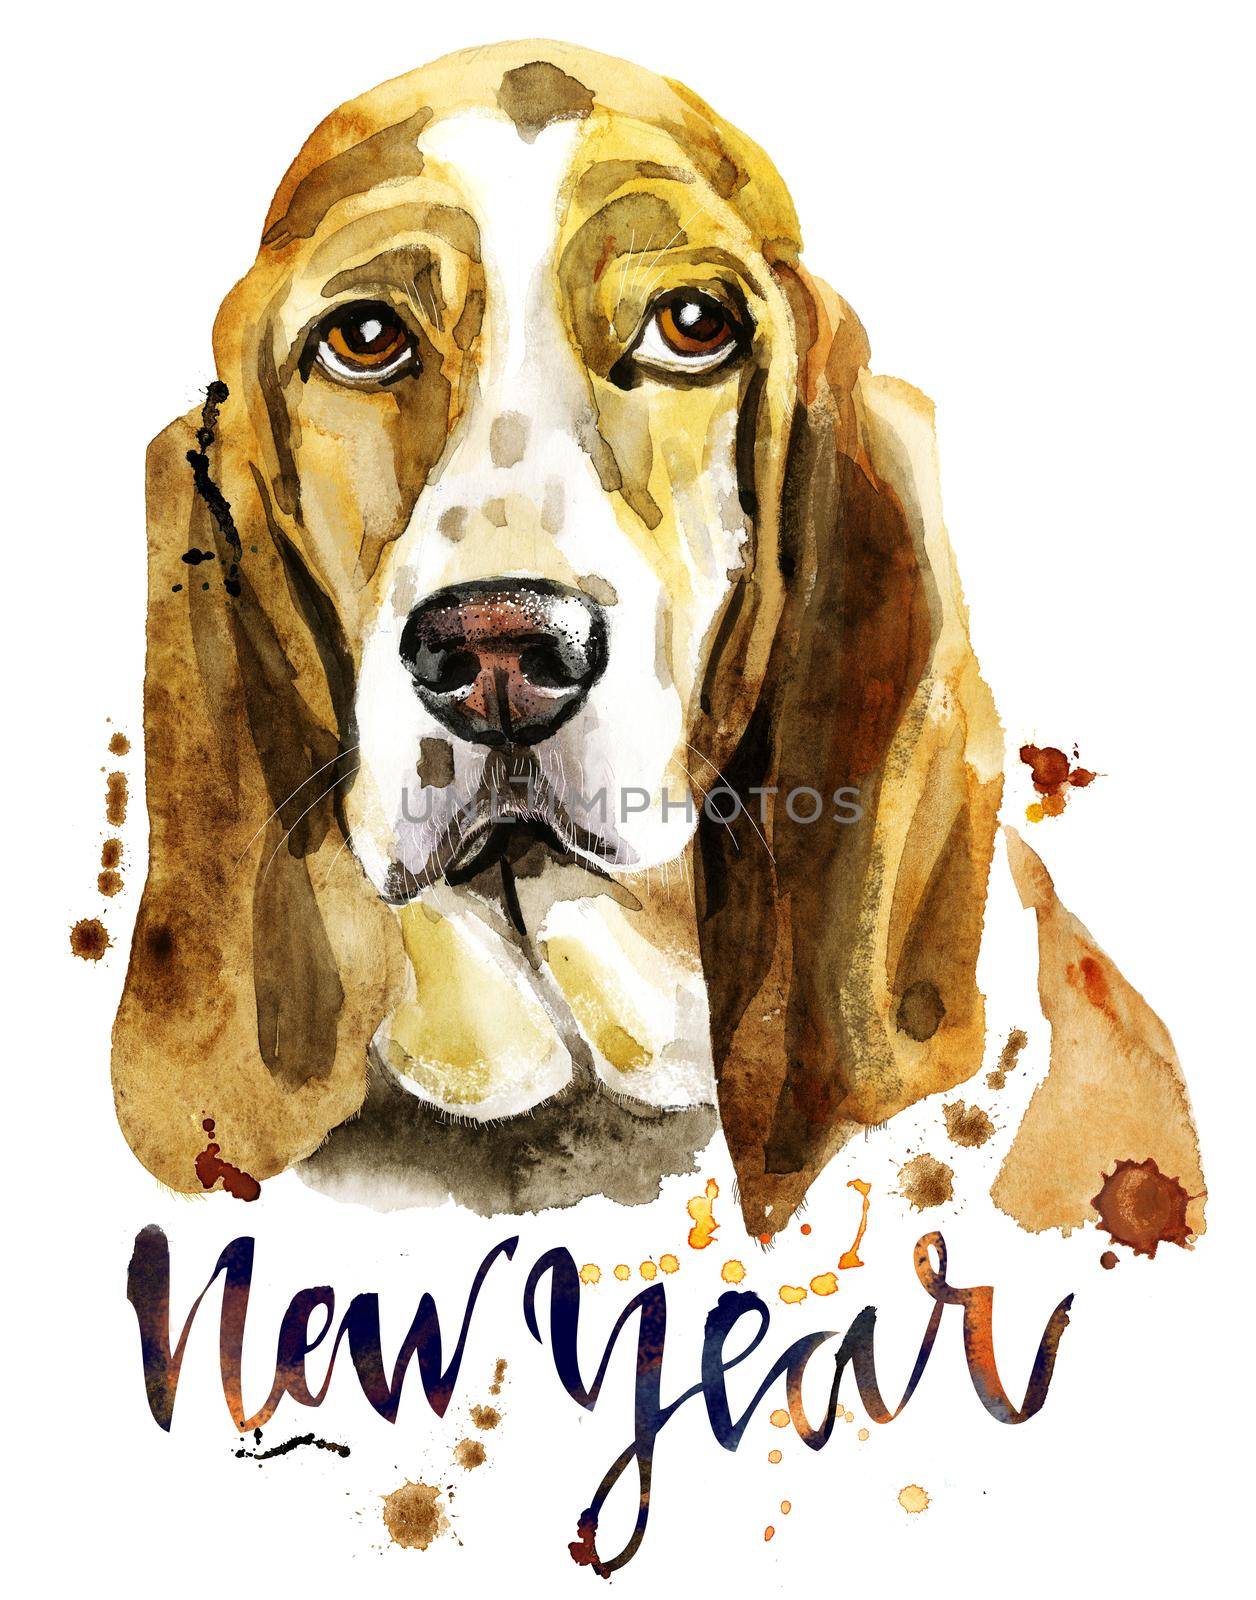 Watercolor portrait of basset hound by NataOmsk